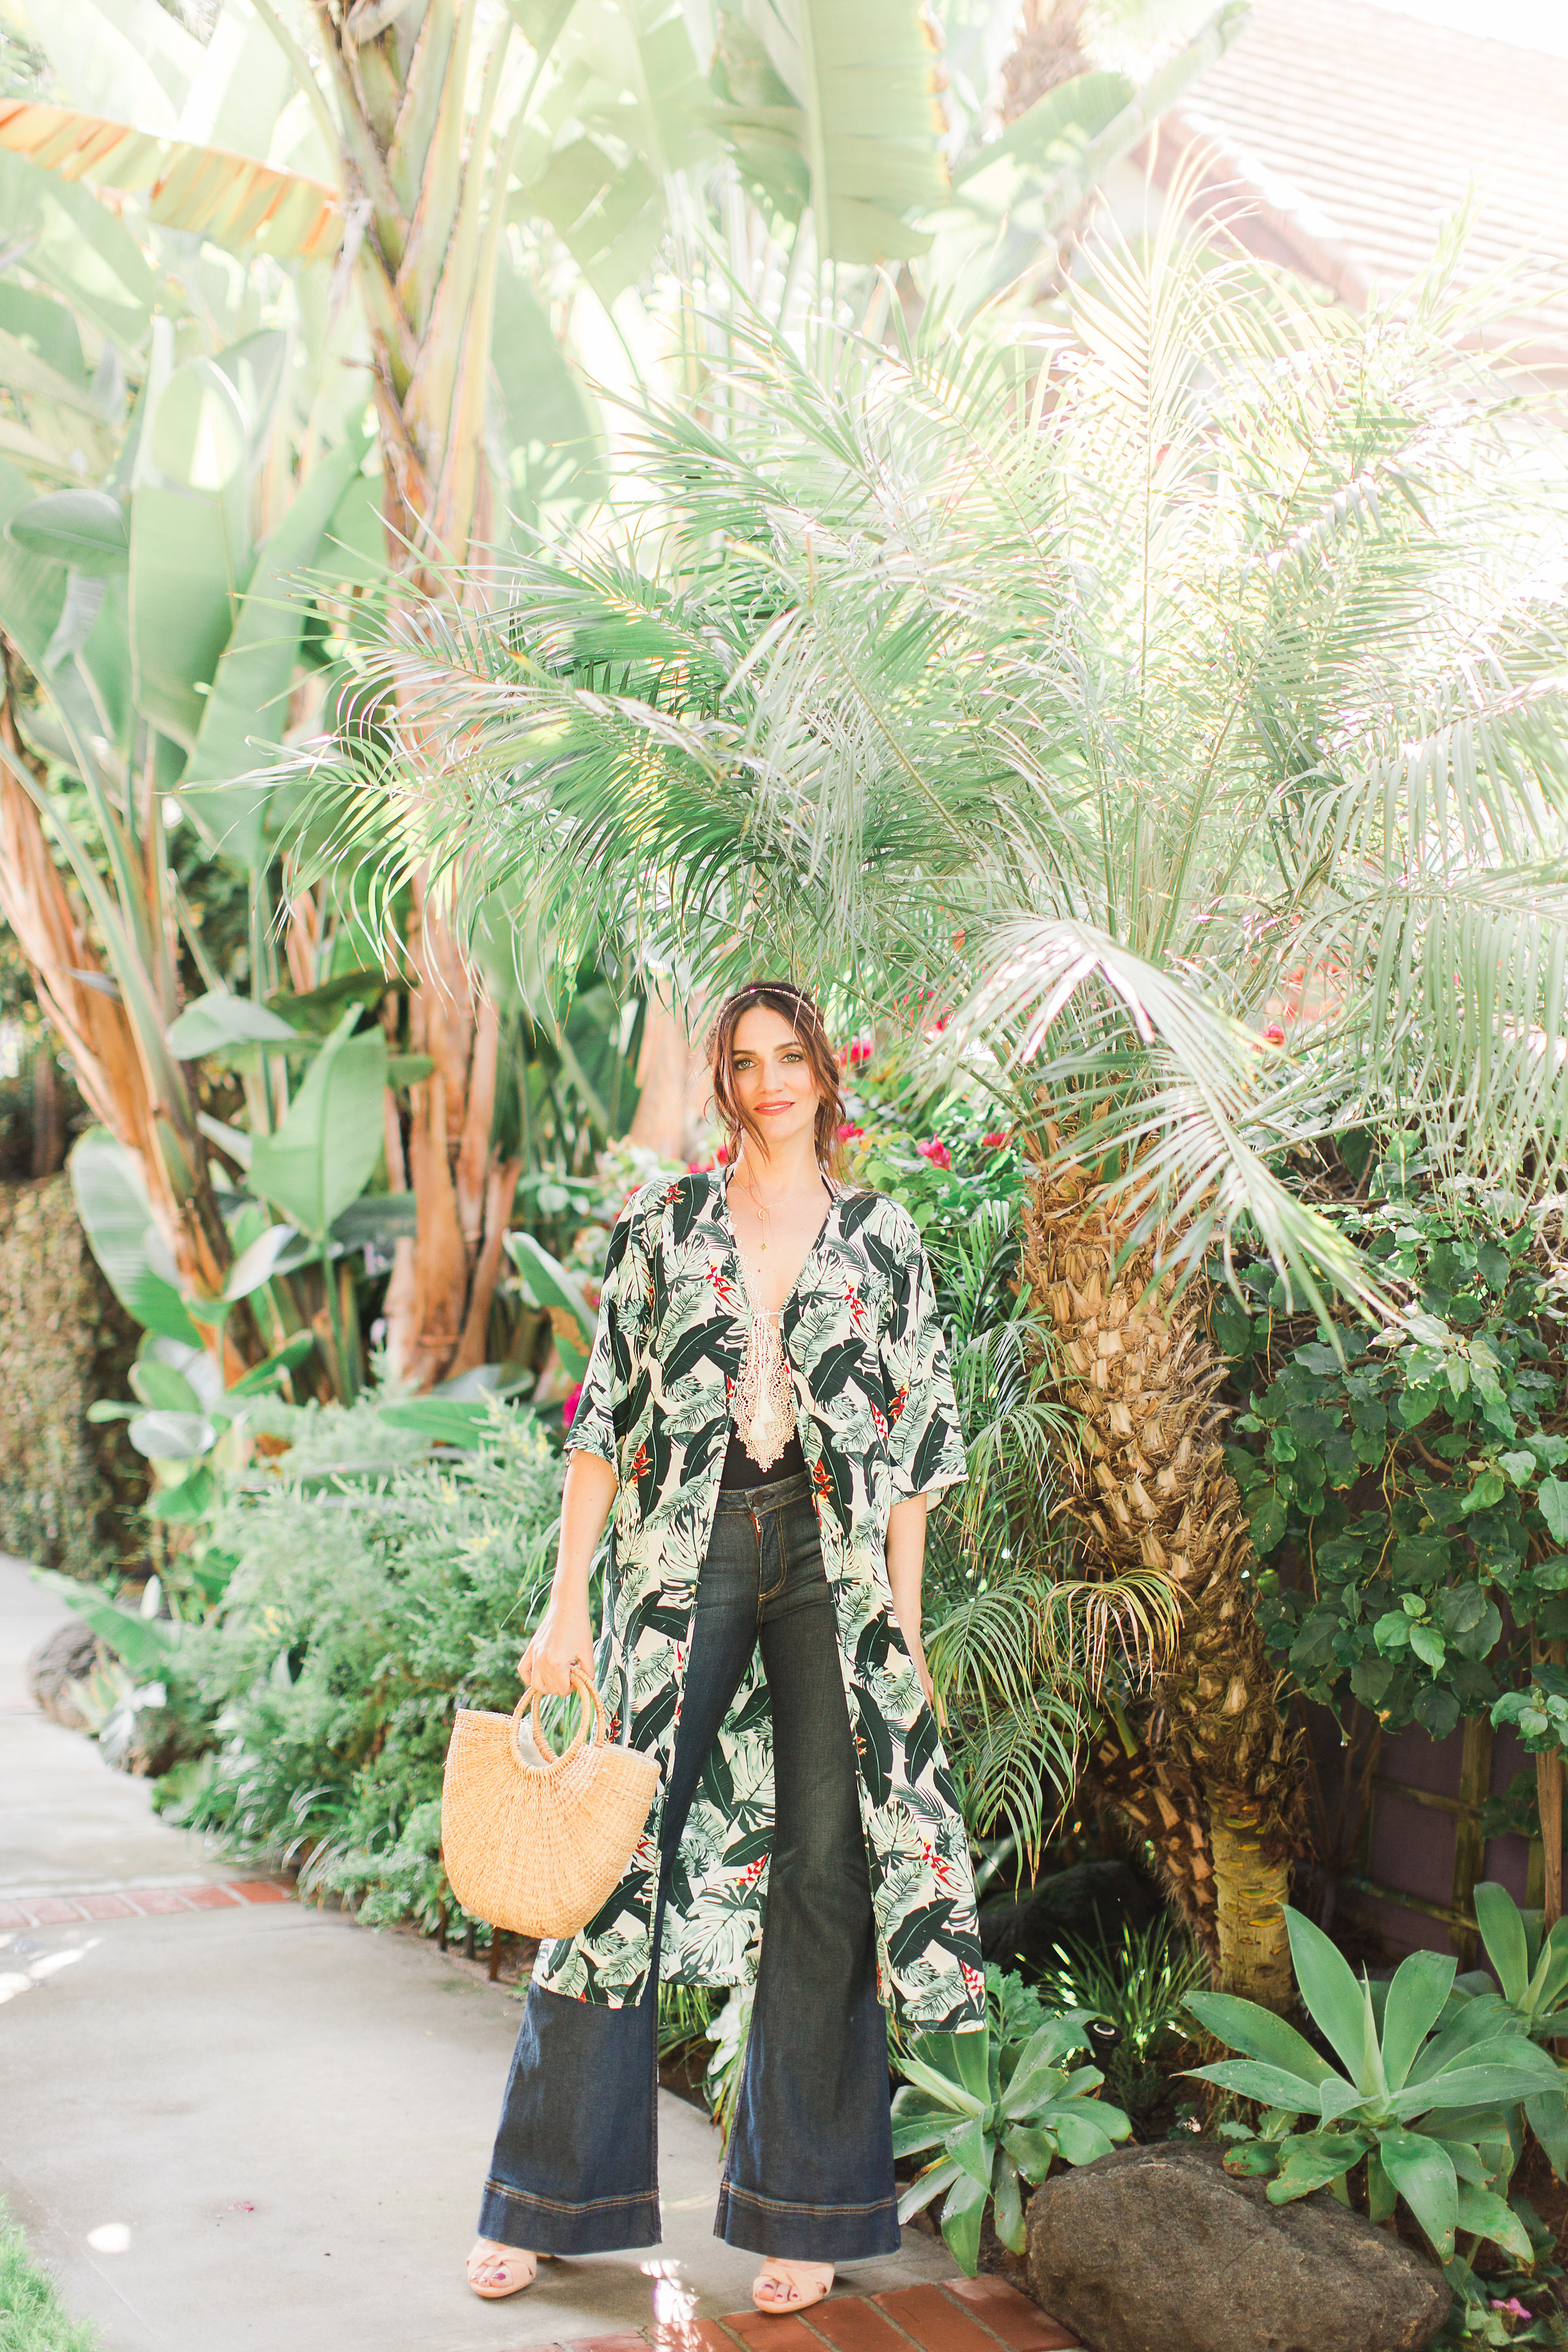 Time to Grab Rachel Zoe's Favorite Things for Spring 2021 with